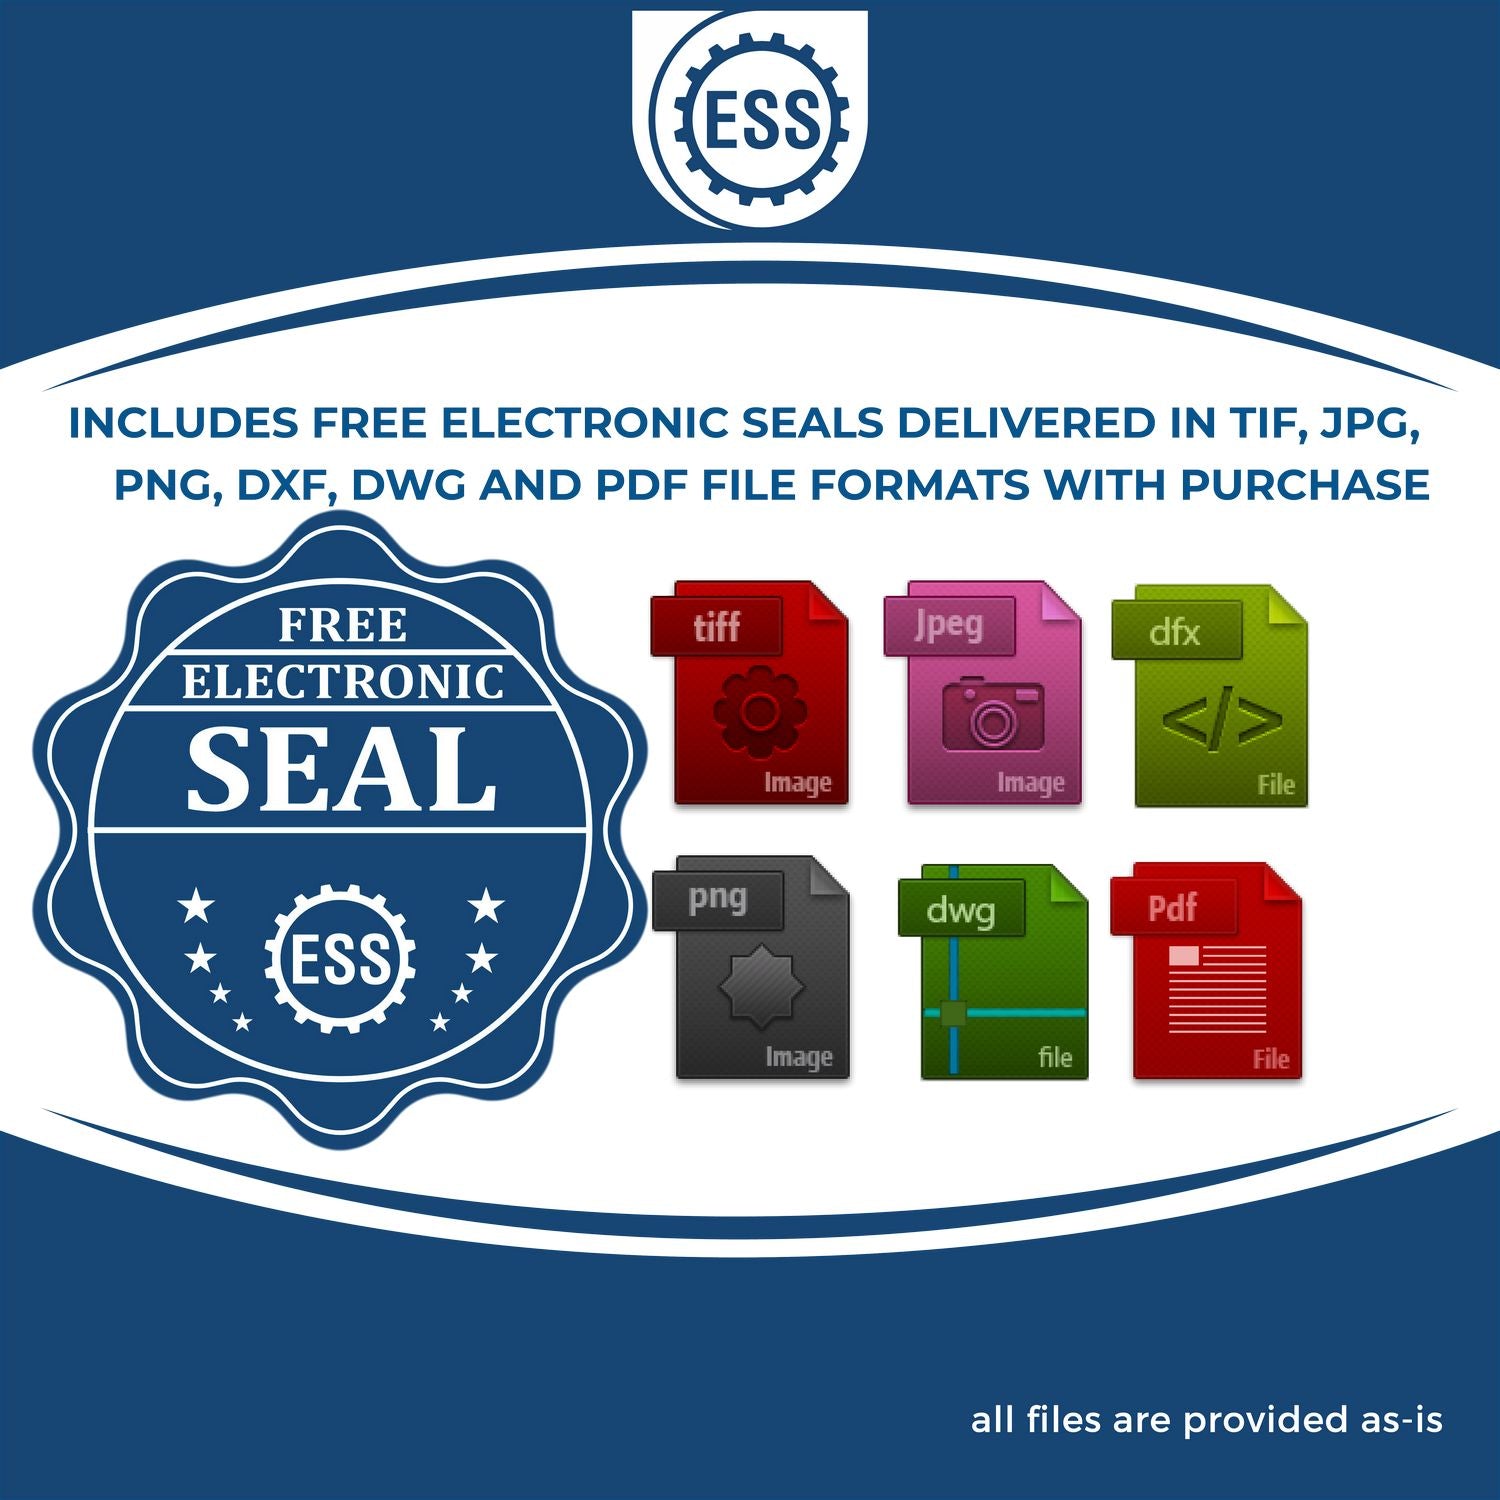 An infographic for the free electronic seal for the Heavy Duty Cast Iron New York Land Surveyor Seal Embosser illustrating the different file type icons such as DXF, DWG, TIF, JPG and PNG.